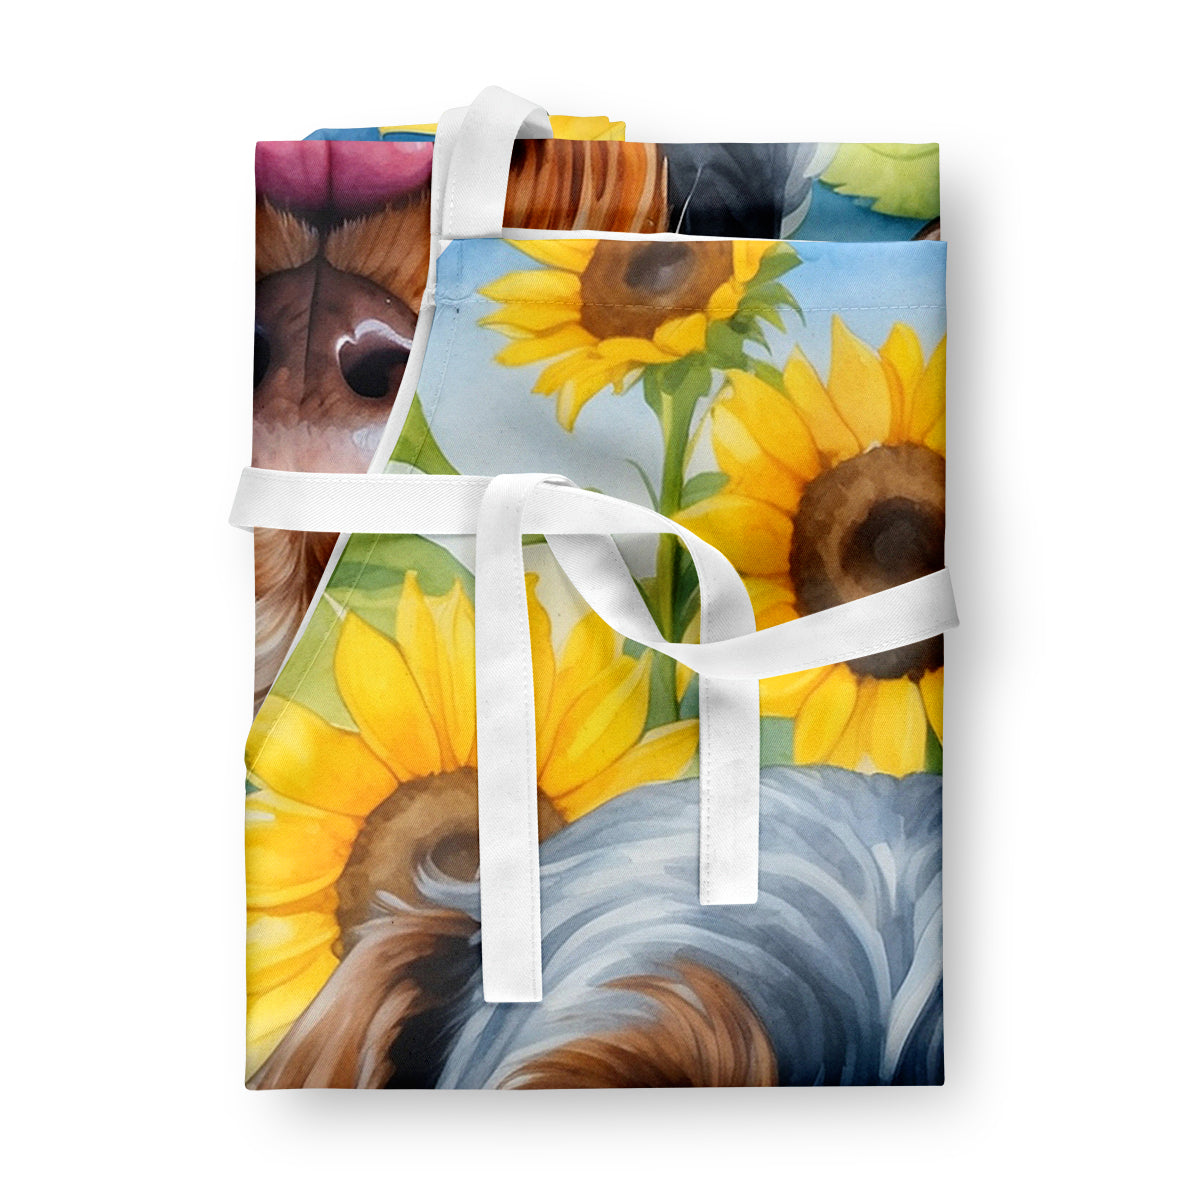 German Wirehaired Pointer in Sunflowers Apron